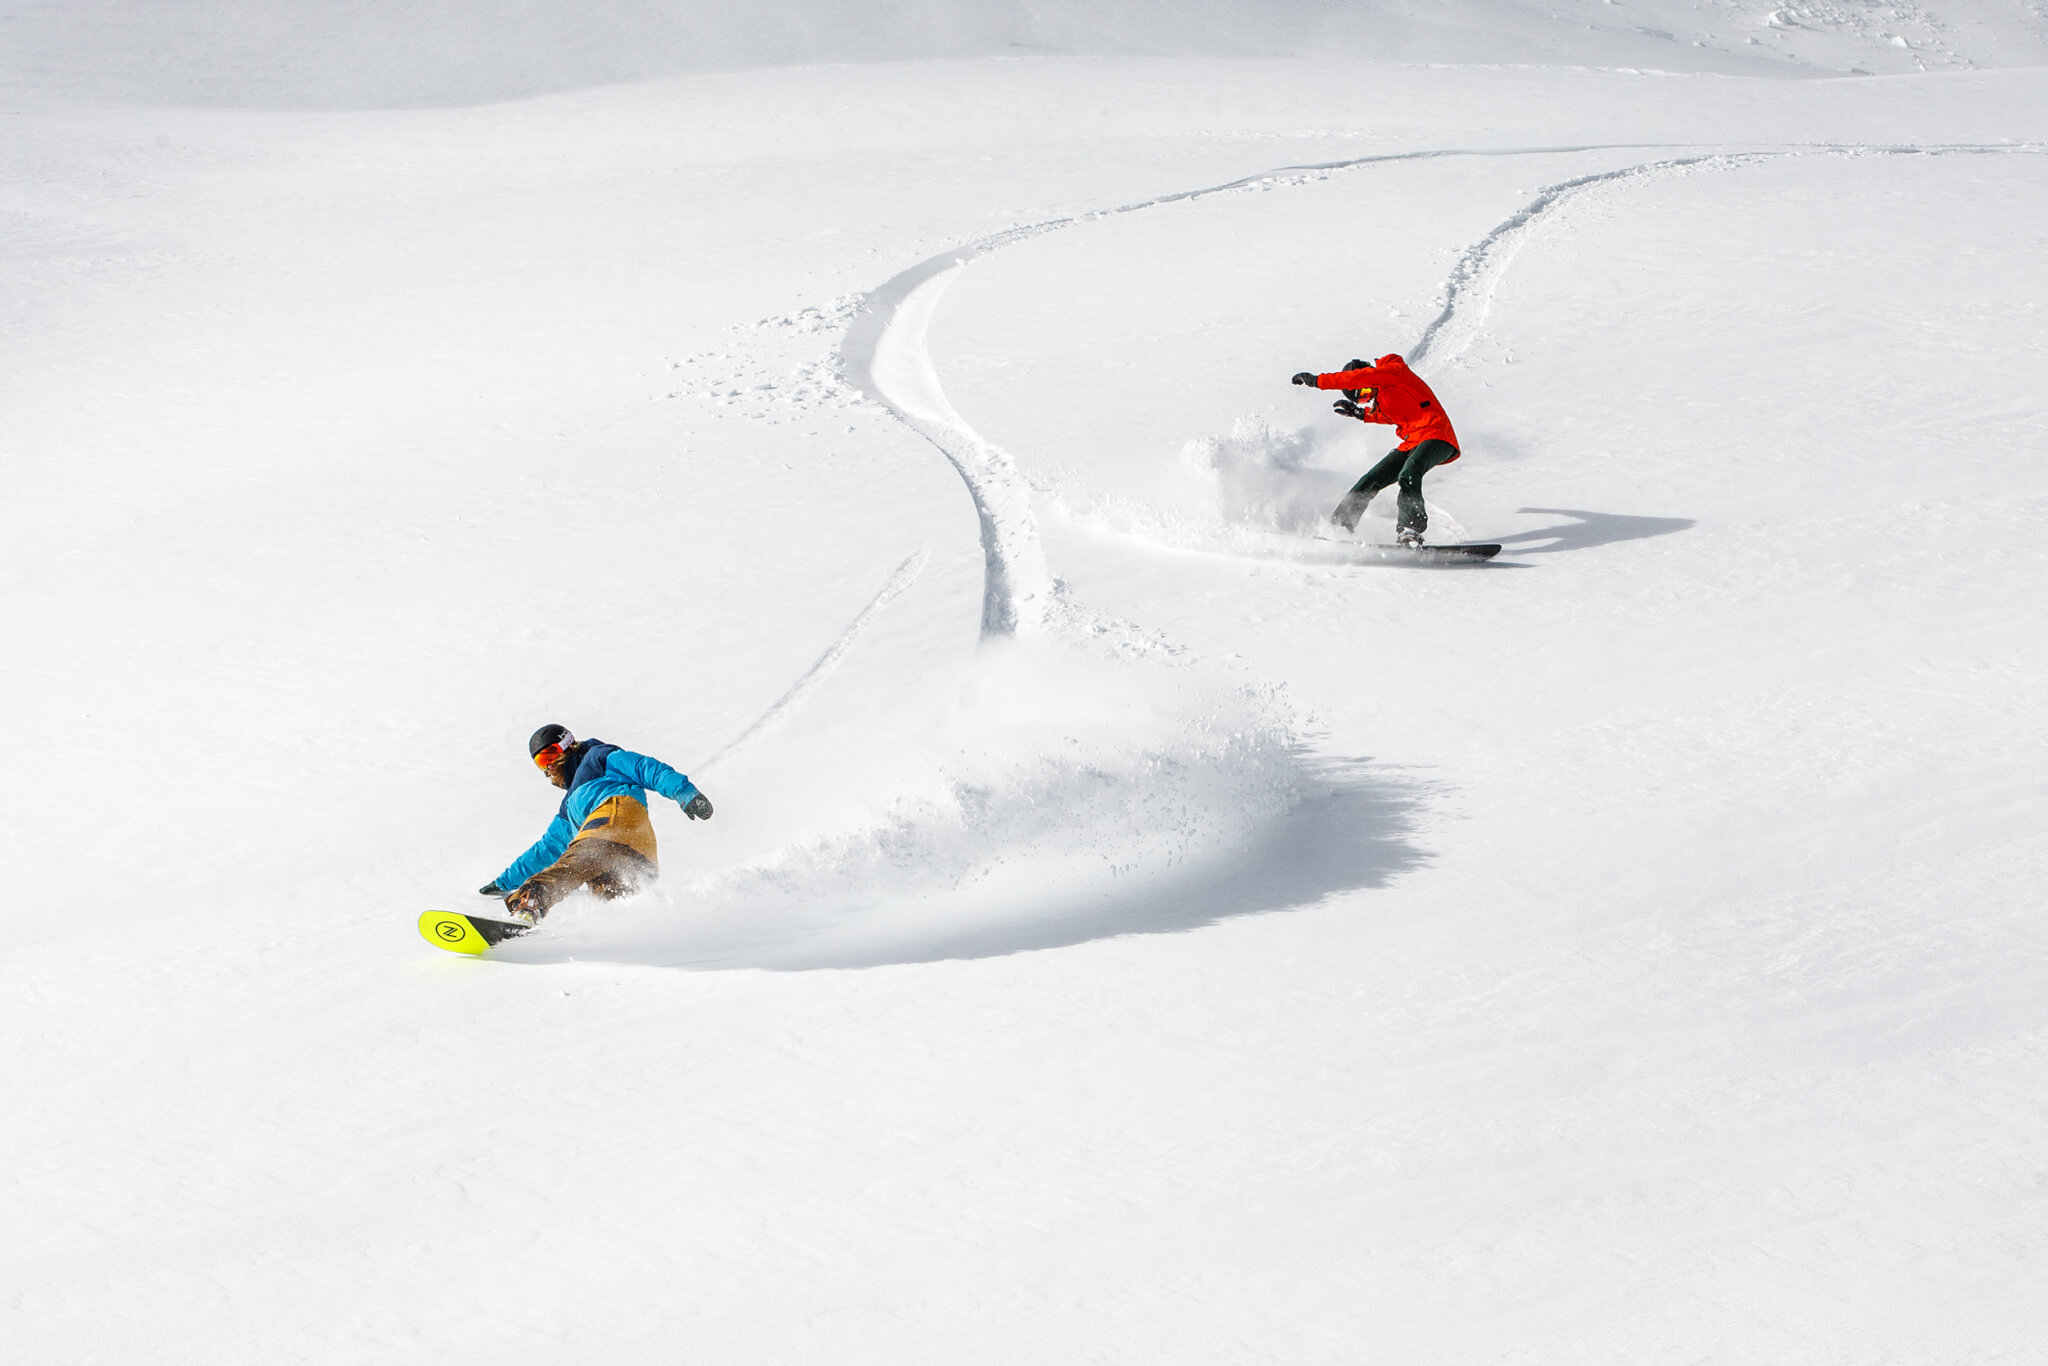 So, You’re Looking for Season Passes to the Best California Ski Resorts?